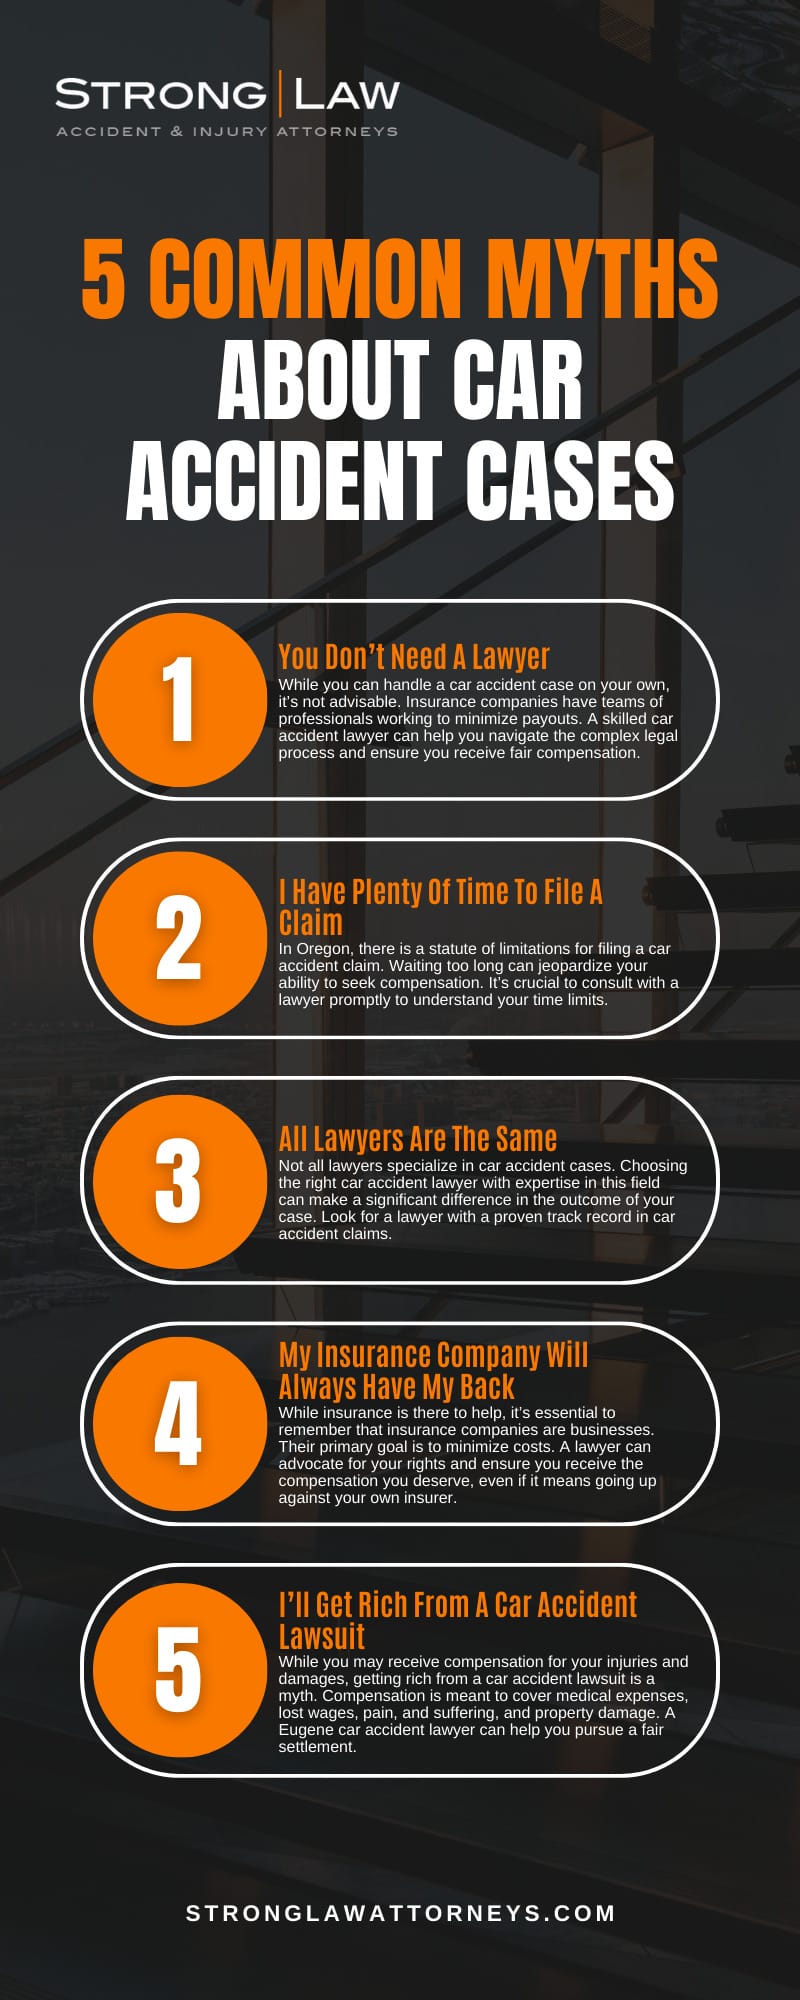 5 Common Myths About Car Accident Cases Infographic